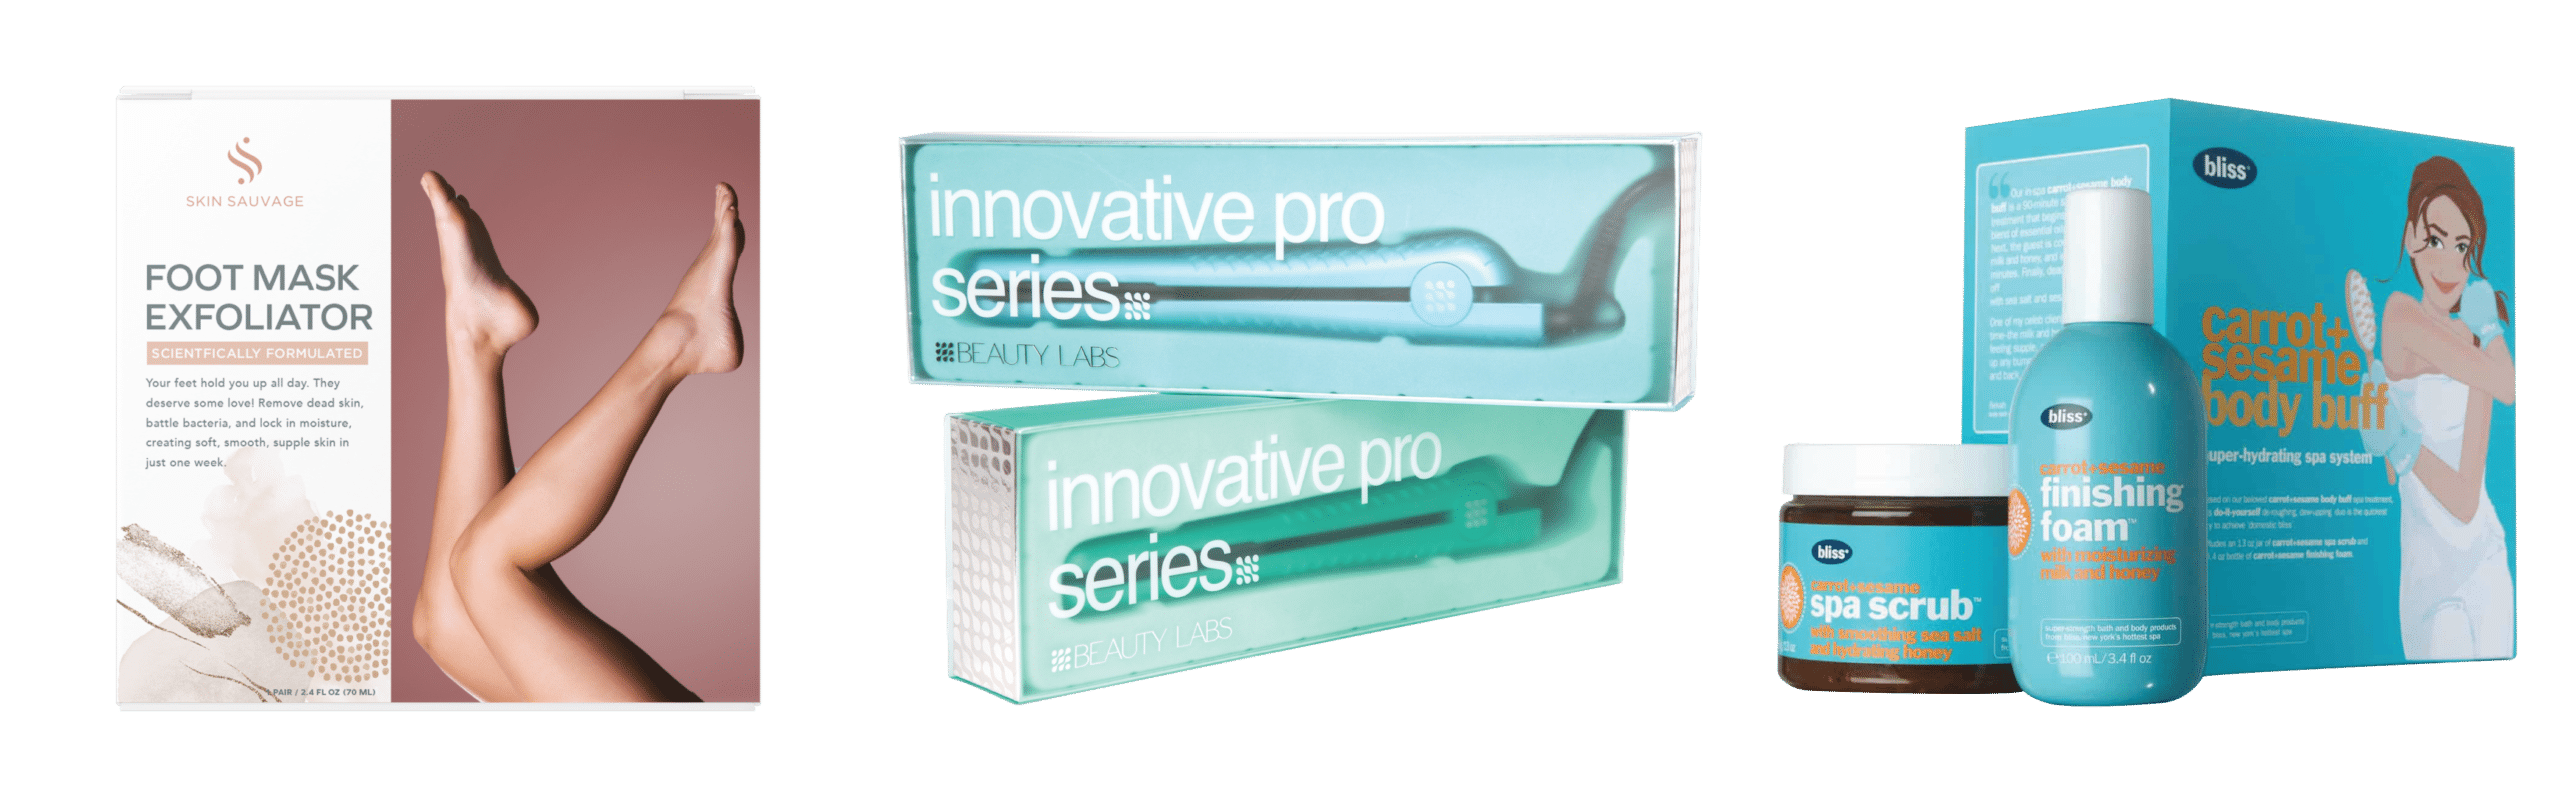 A foot mask exfoliation product with neutral tone branding and clean packaging design, Two hair straightener package variations in blue and green with bold font, Final designs of a newly branded product line consisting of a spa scrub, finishing foam, and body buff for Bliss Beauty